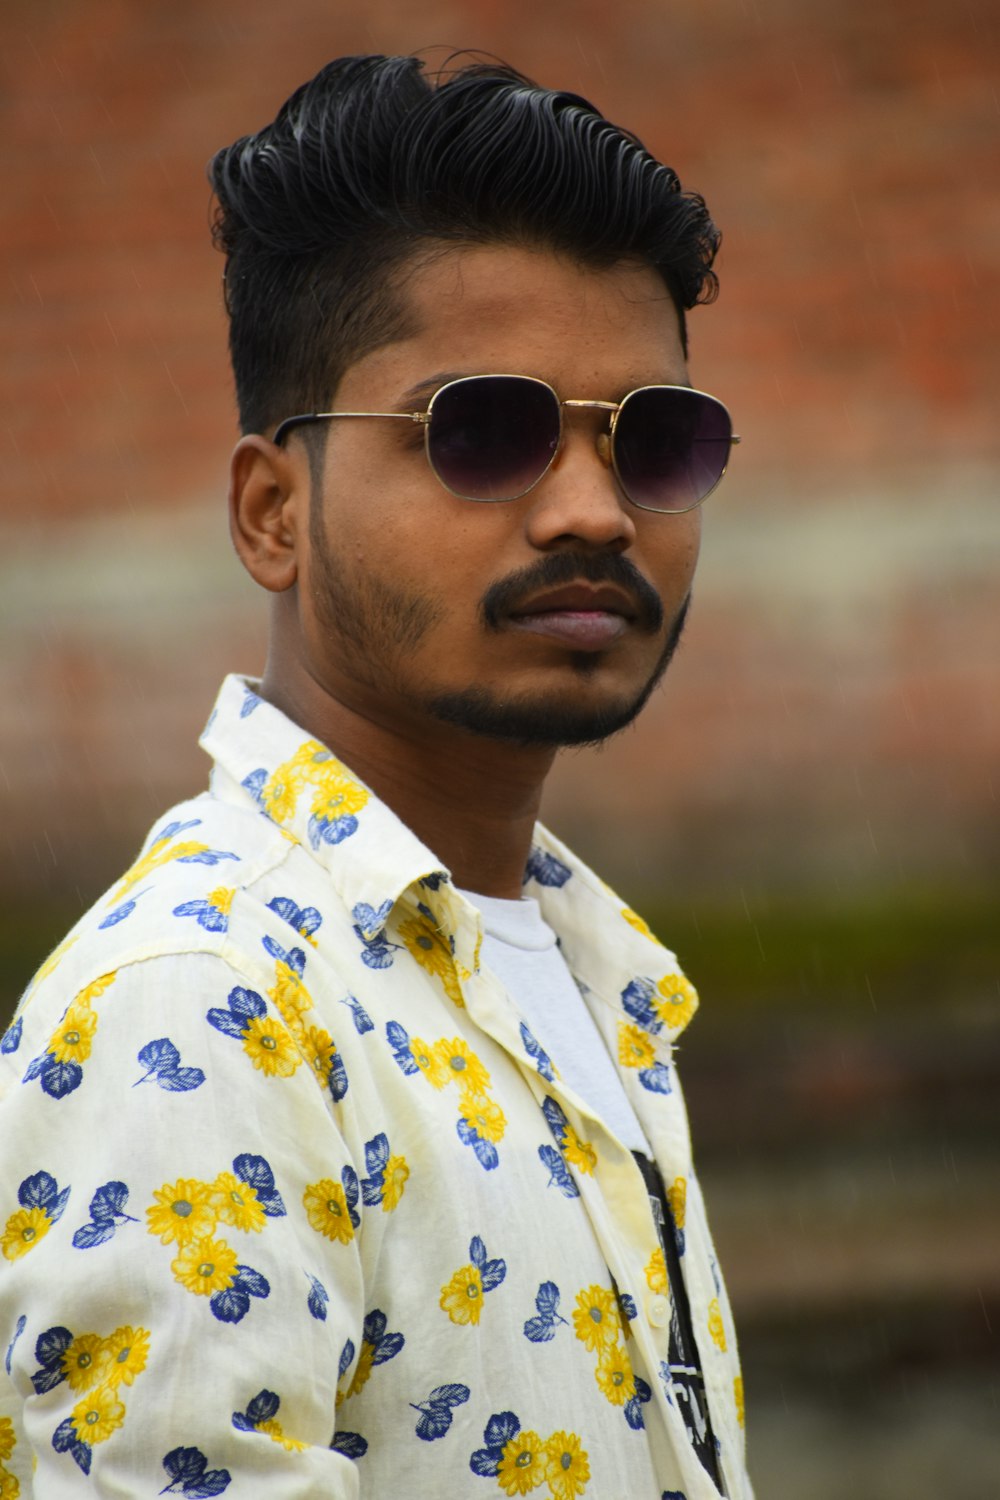 man in white yellow and blue floral button up shirt wearing black sunglasses